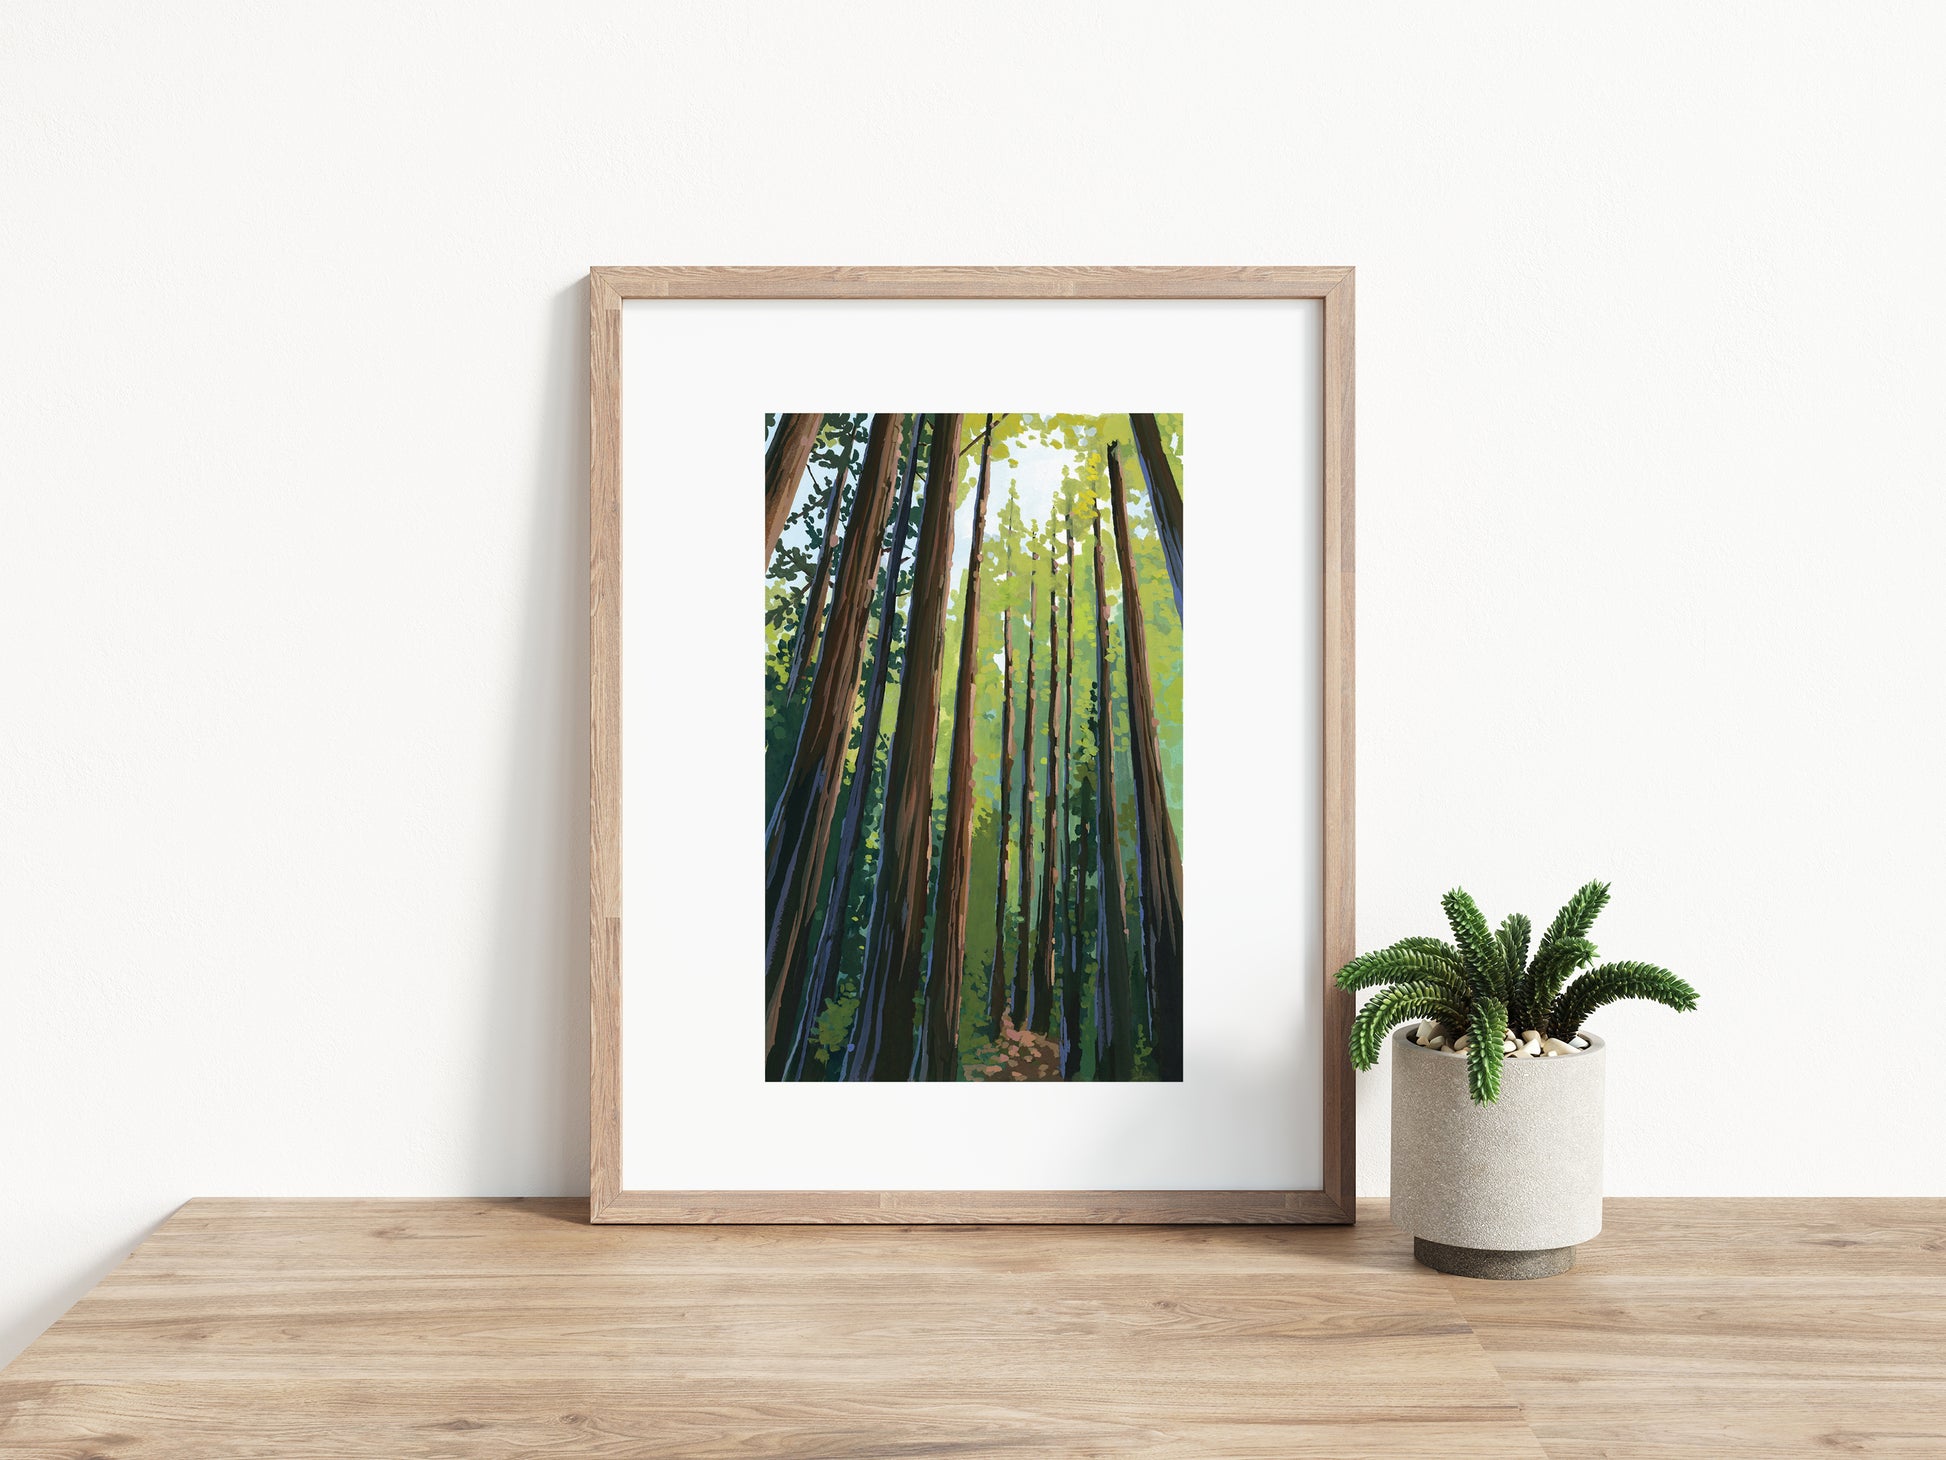 framed image of Art print of redwood trees in California’s Muir Woods National Monument.